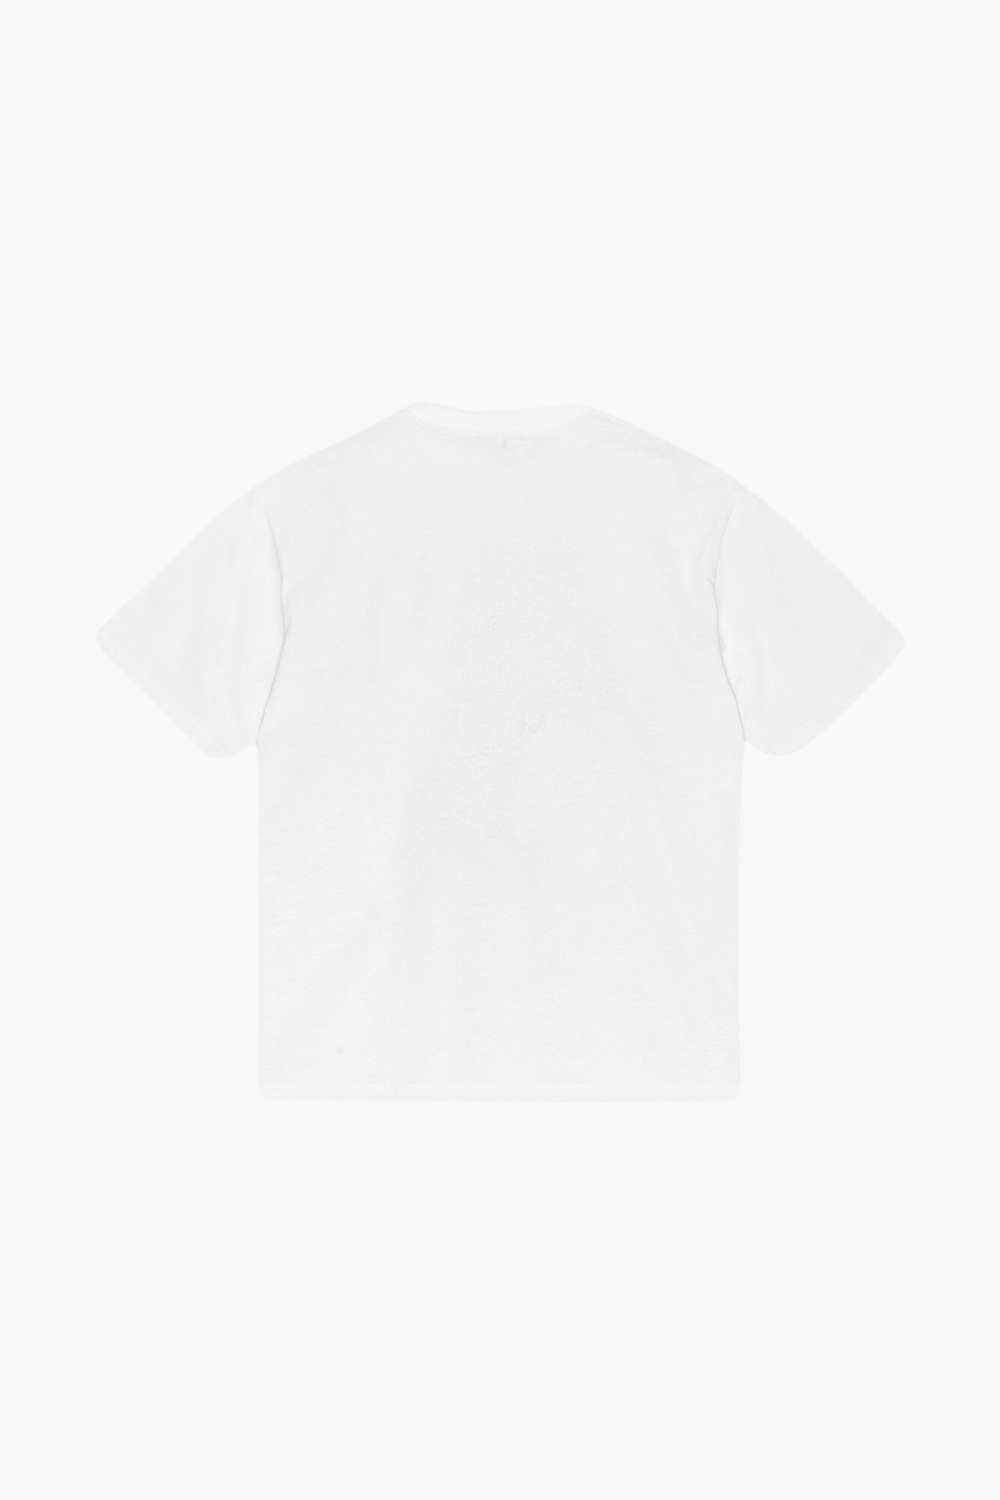 Future Relaxed Cocktail T-Shirt T3878 - Bright White - GANNI